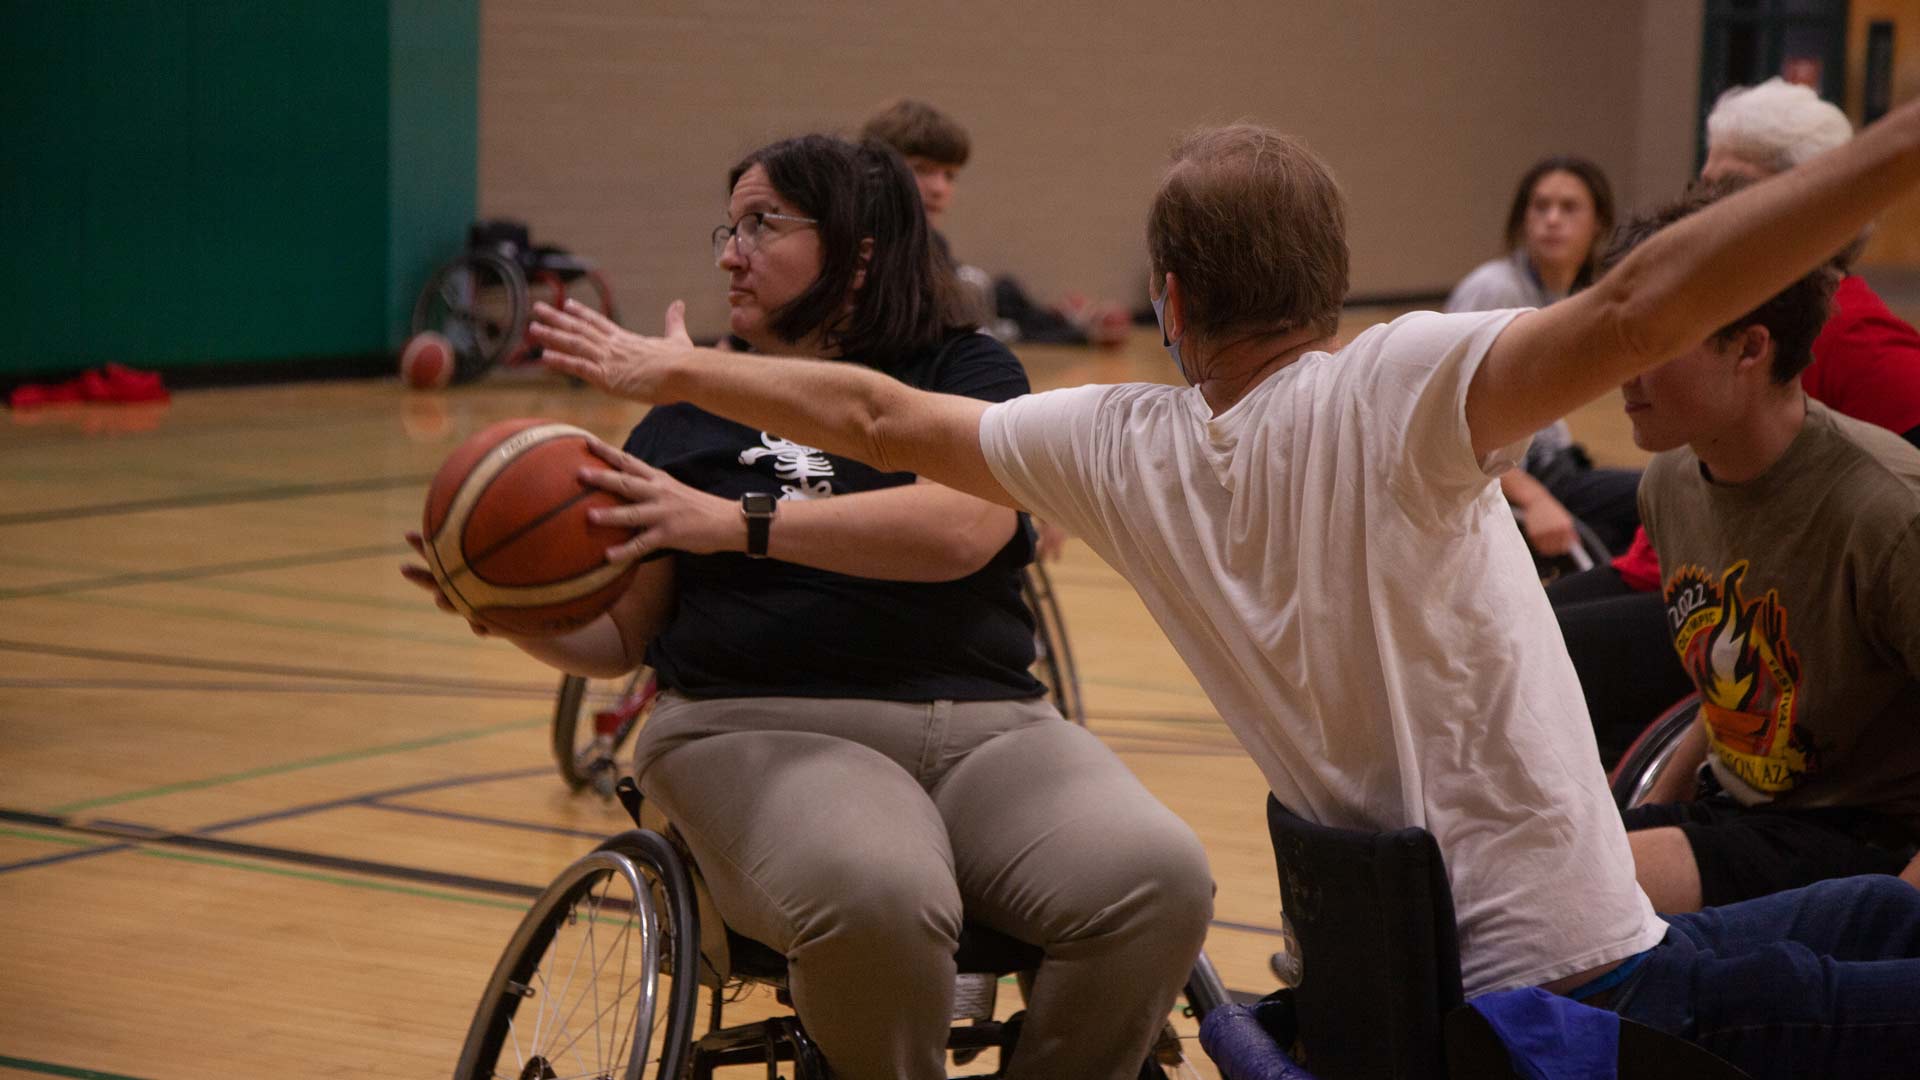 A woman is attempting to pass a basketball to someone behind her as an attendee blocks her shot.